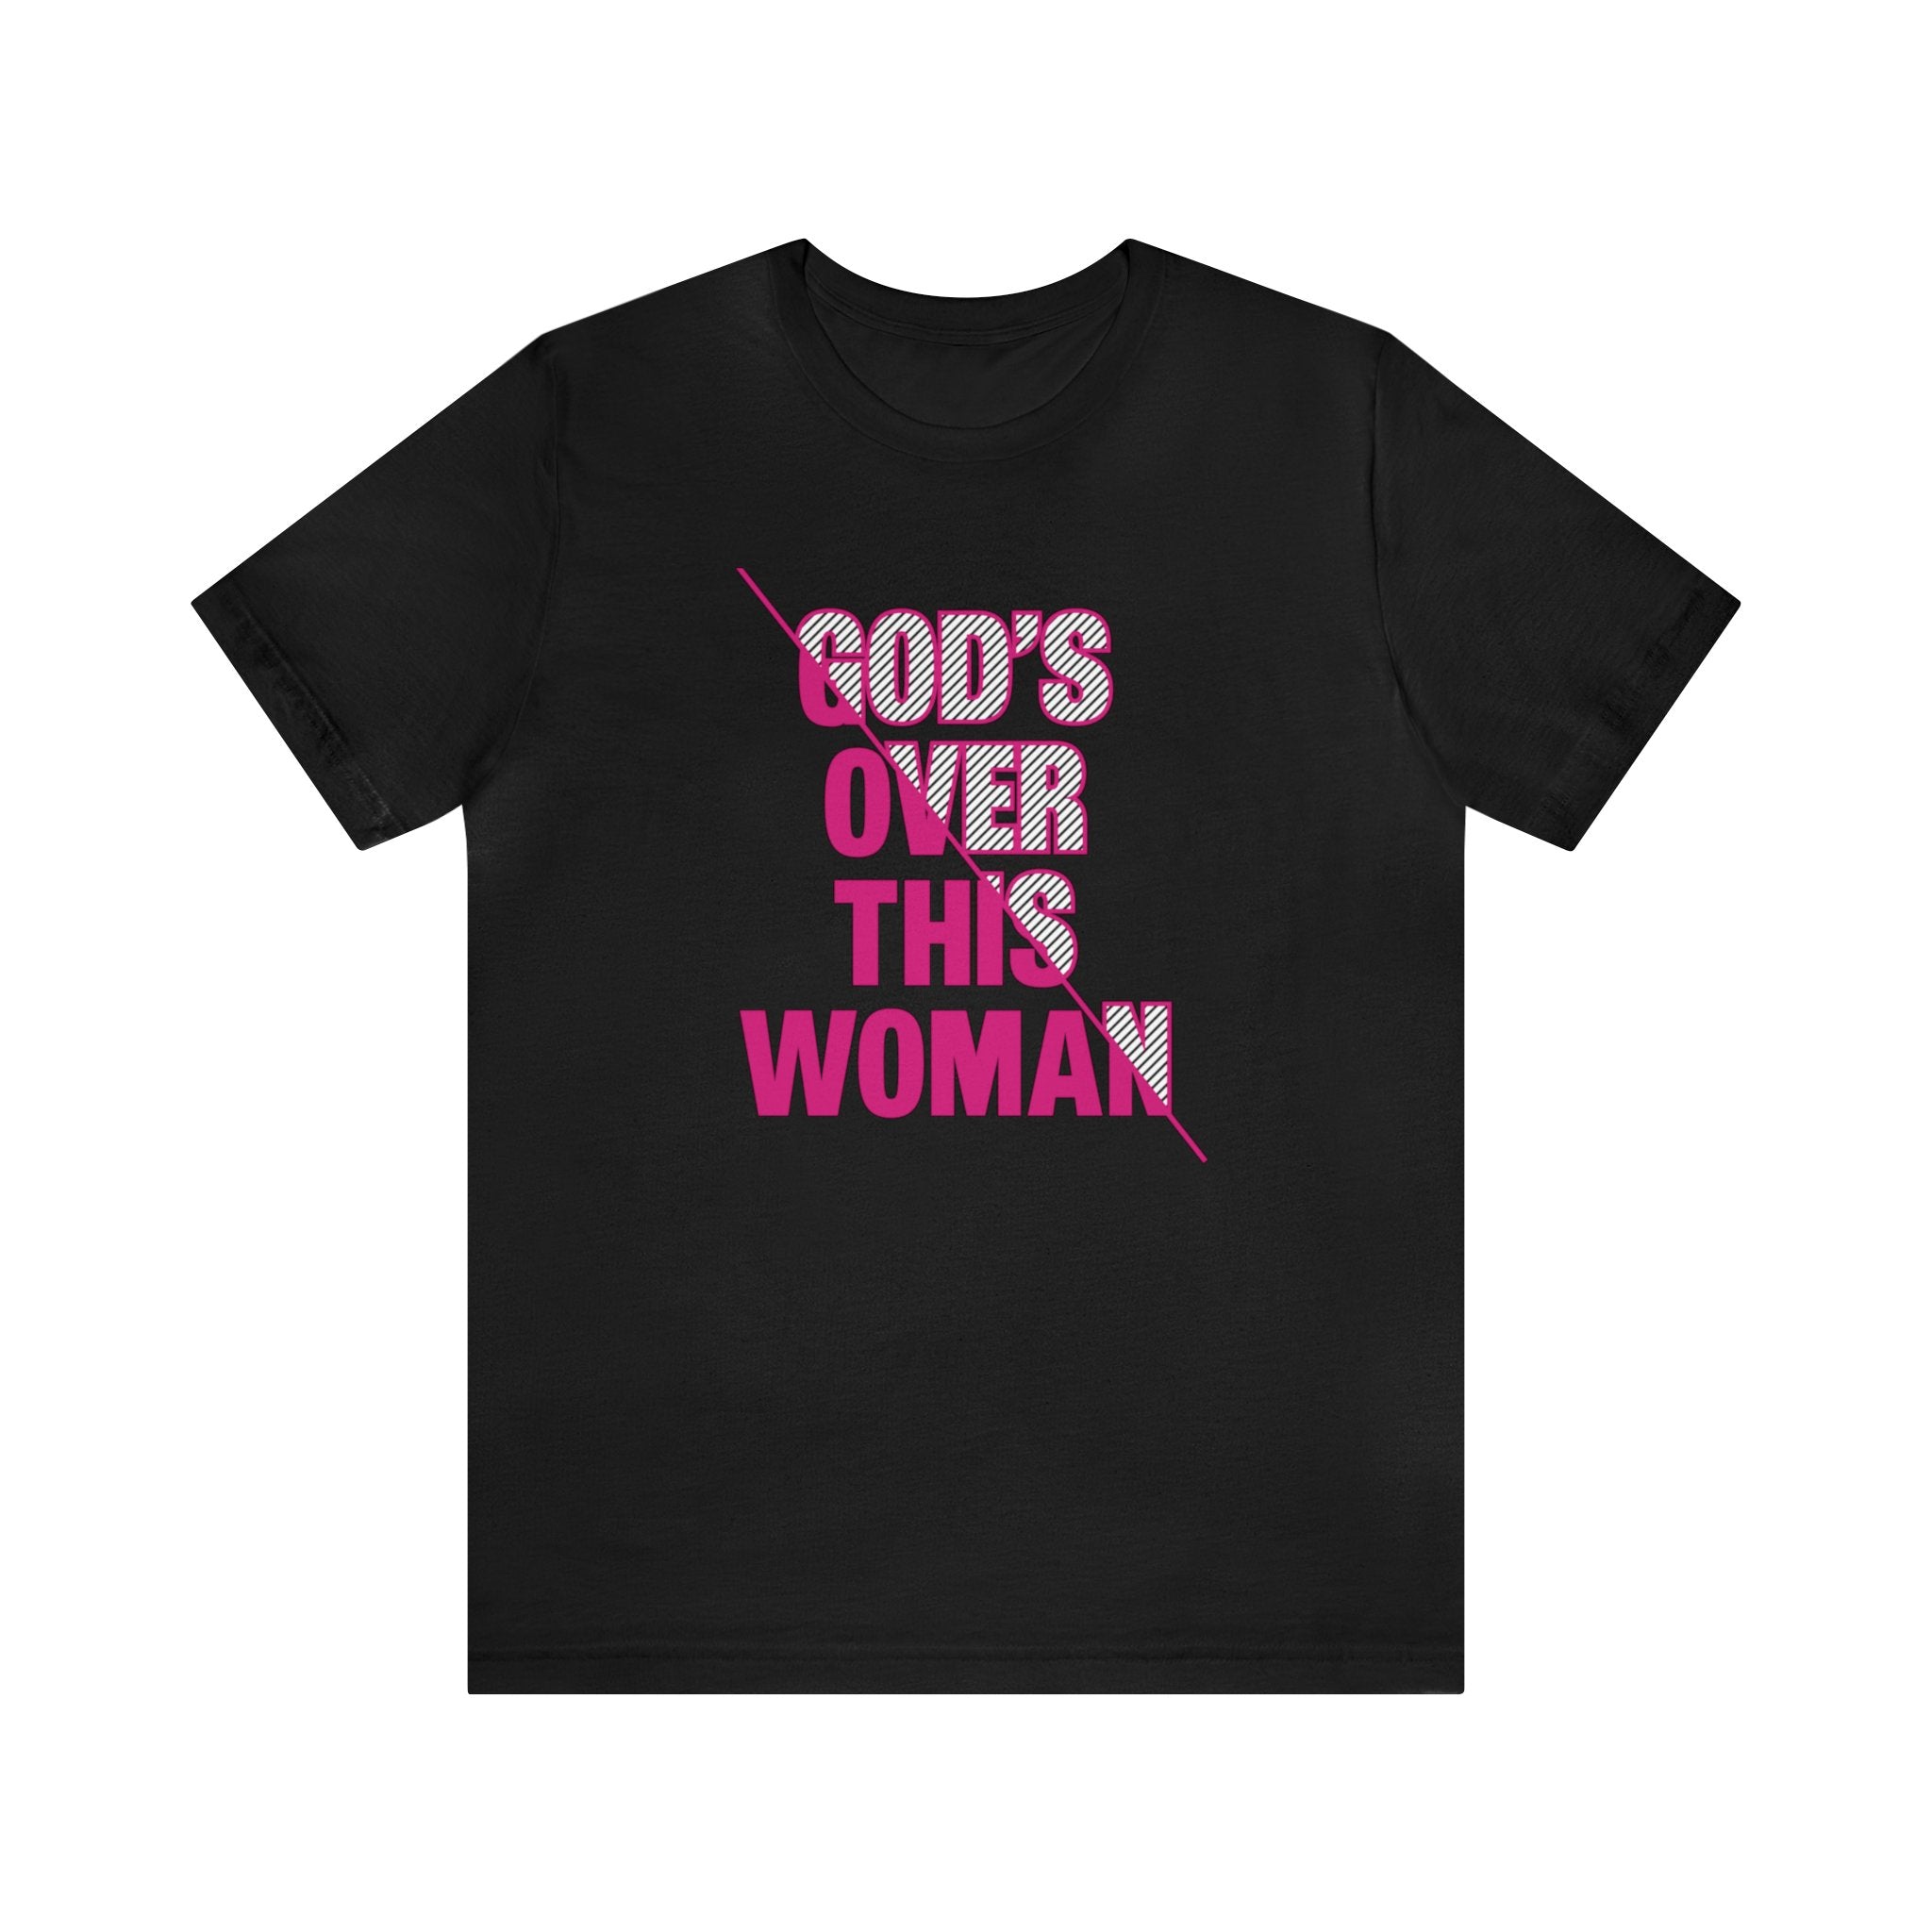 GODs Over This Women pin52 letters Sample Copy of Unisex Jersey Short Sleeve Tee-Black